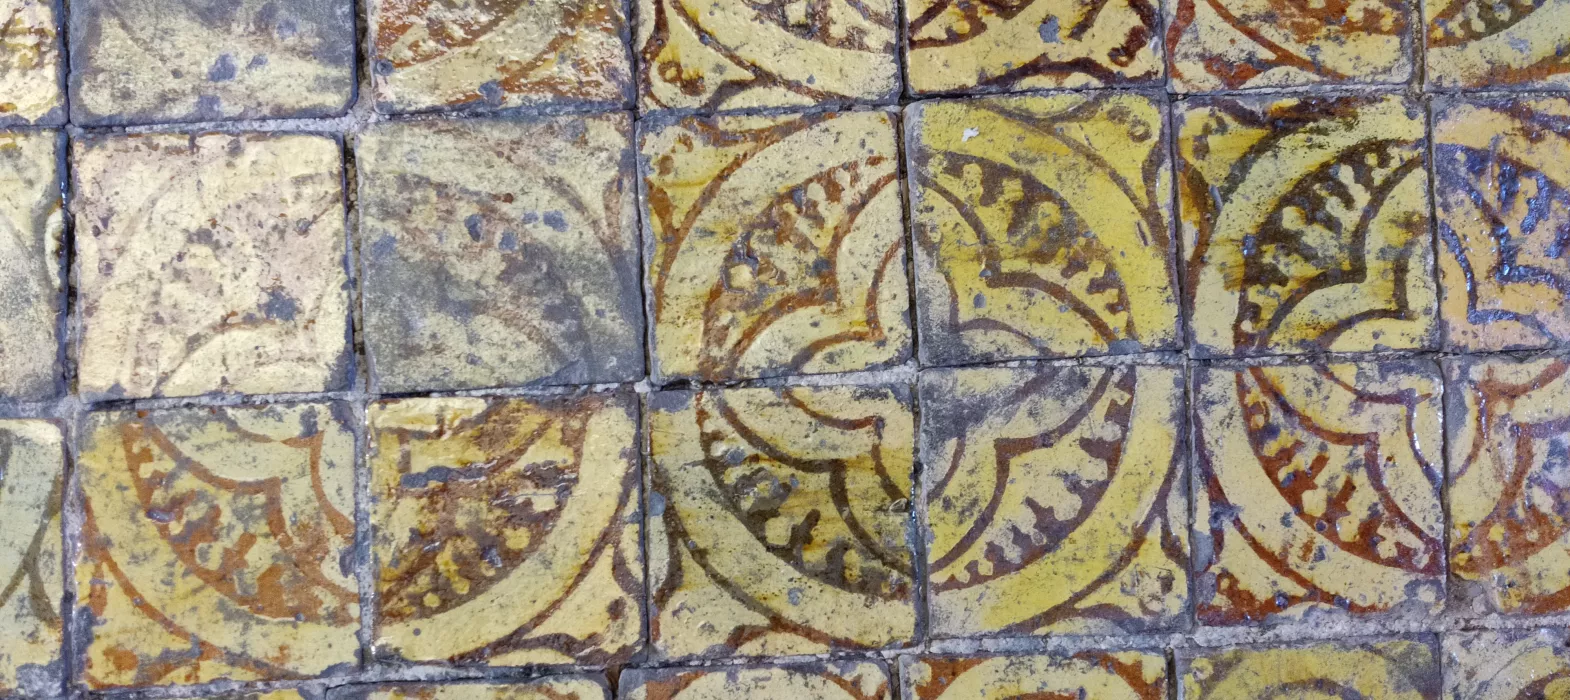 Tiled flooring, Muniment Tower, New College, Oxford